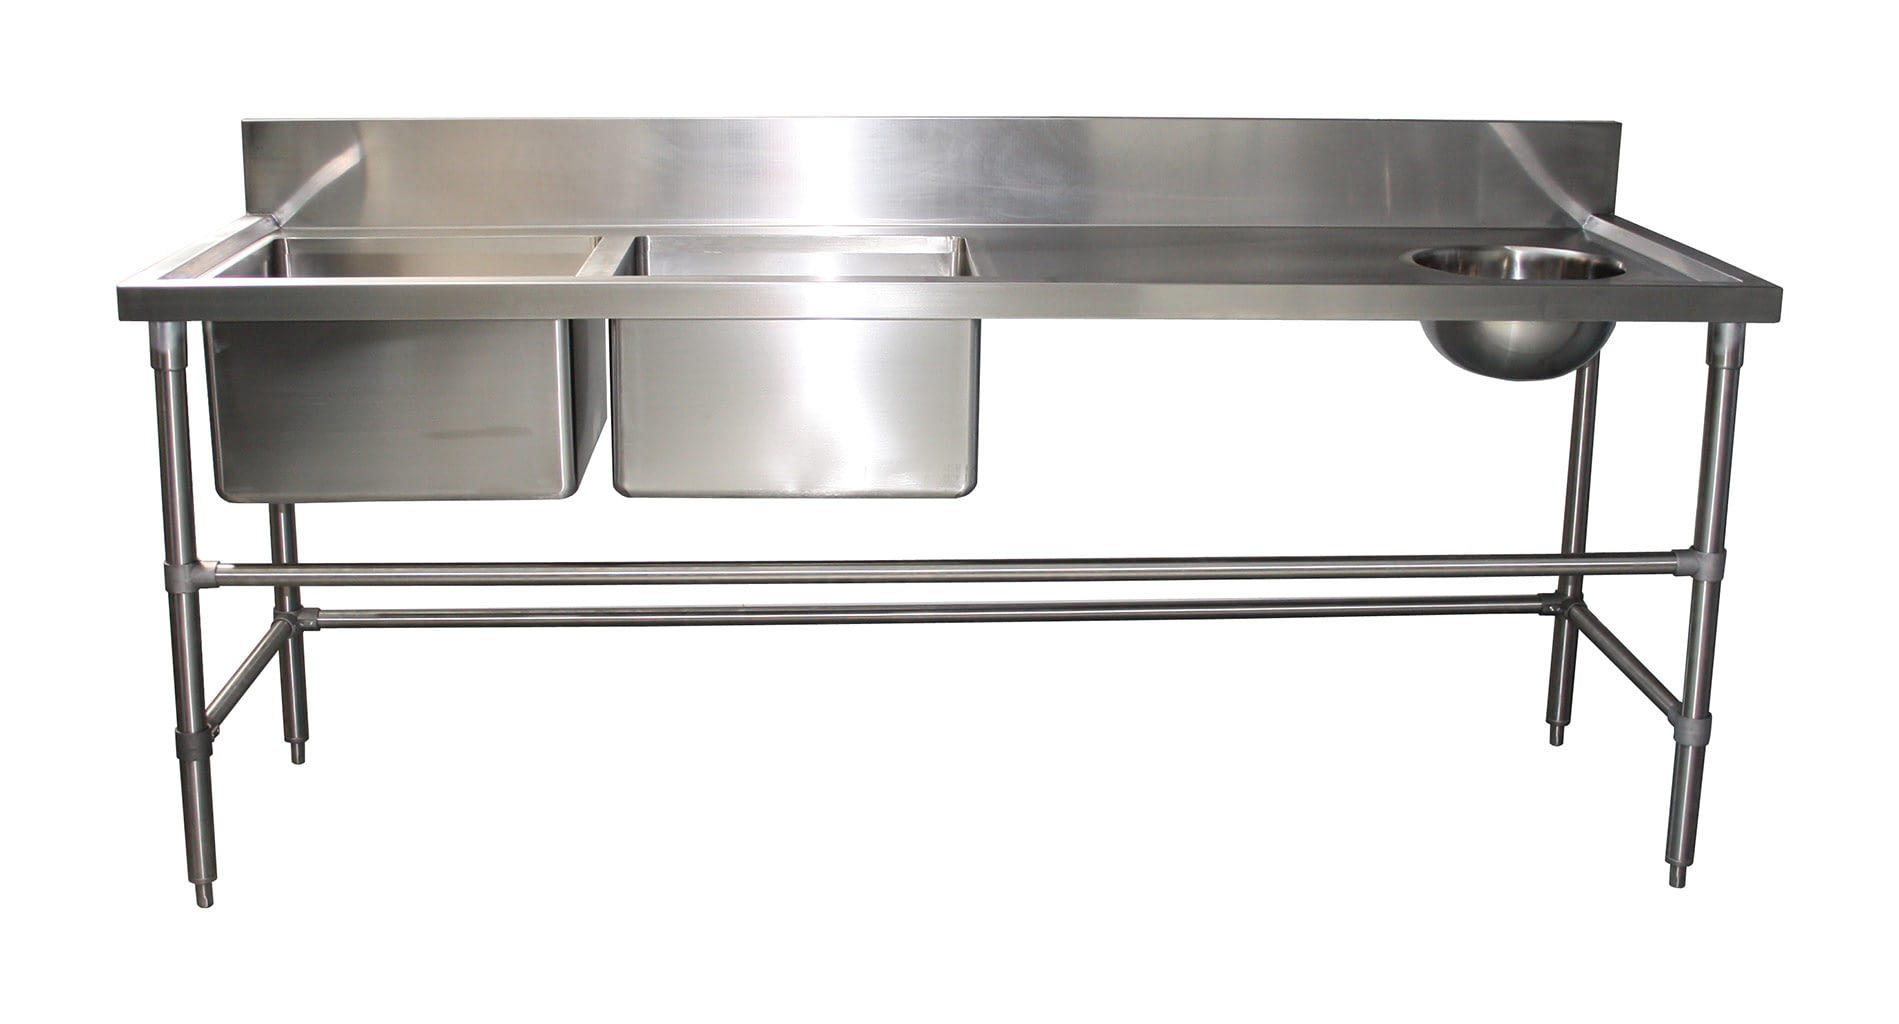 Double Bowl Stainless Kitchen Sink With Handbasin, 2200 x 700 x 900mm high